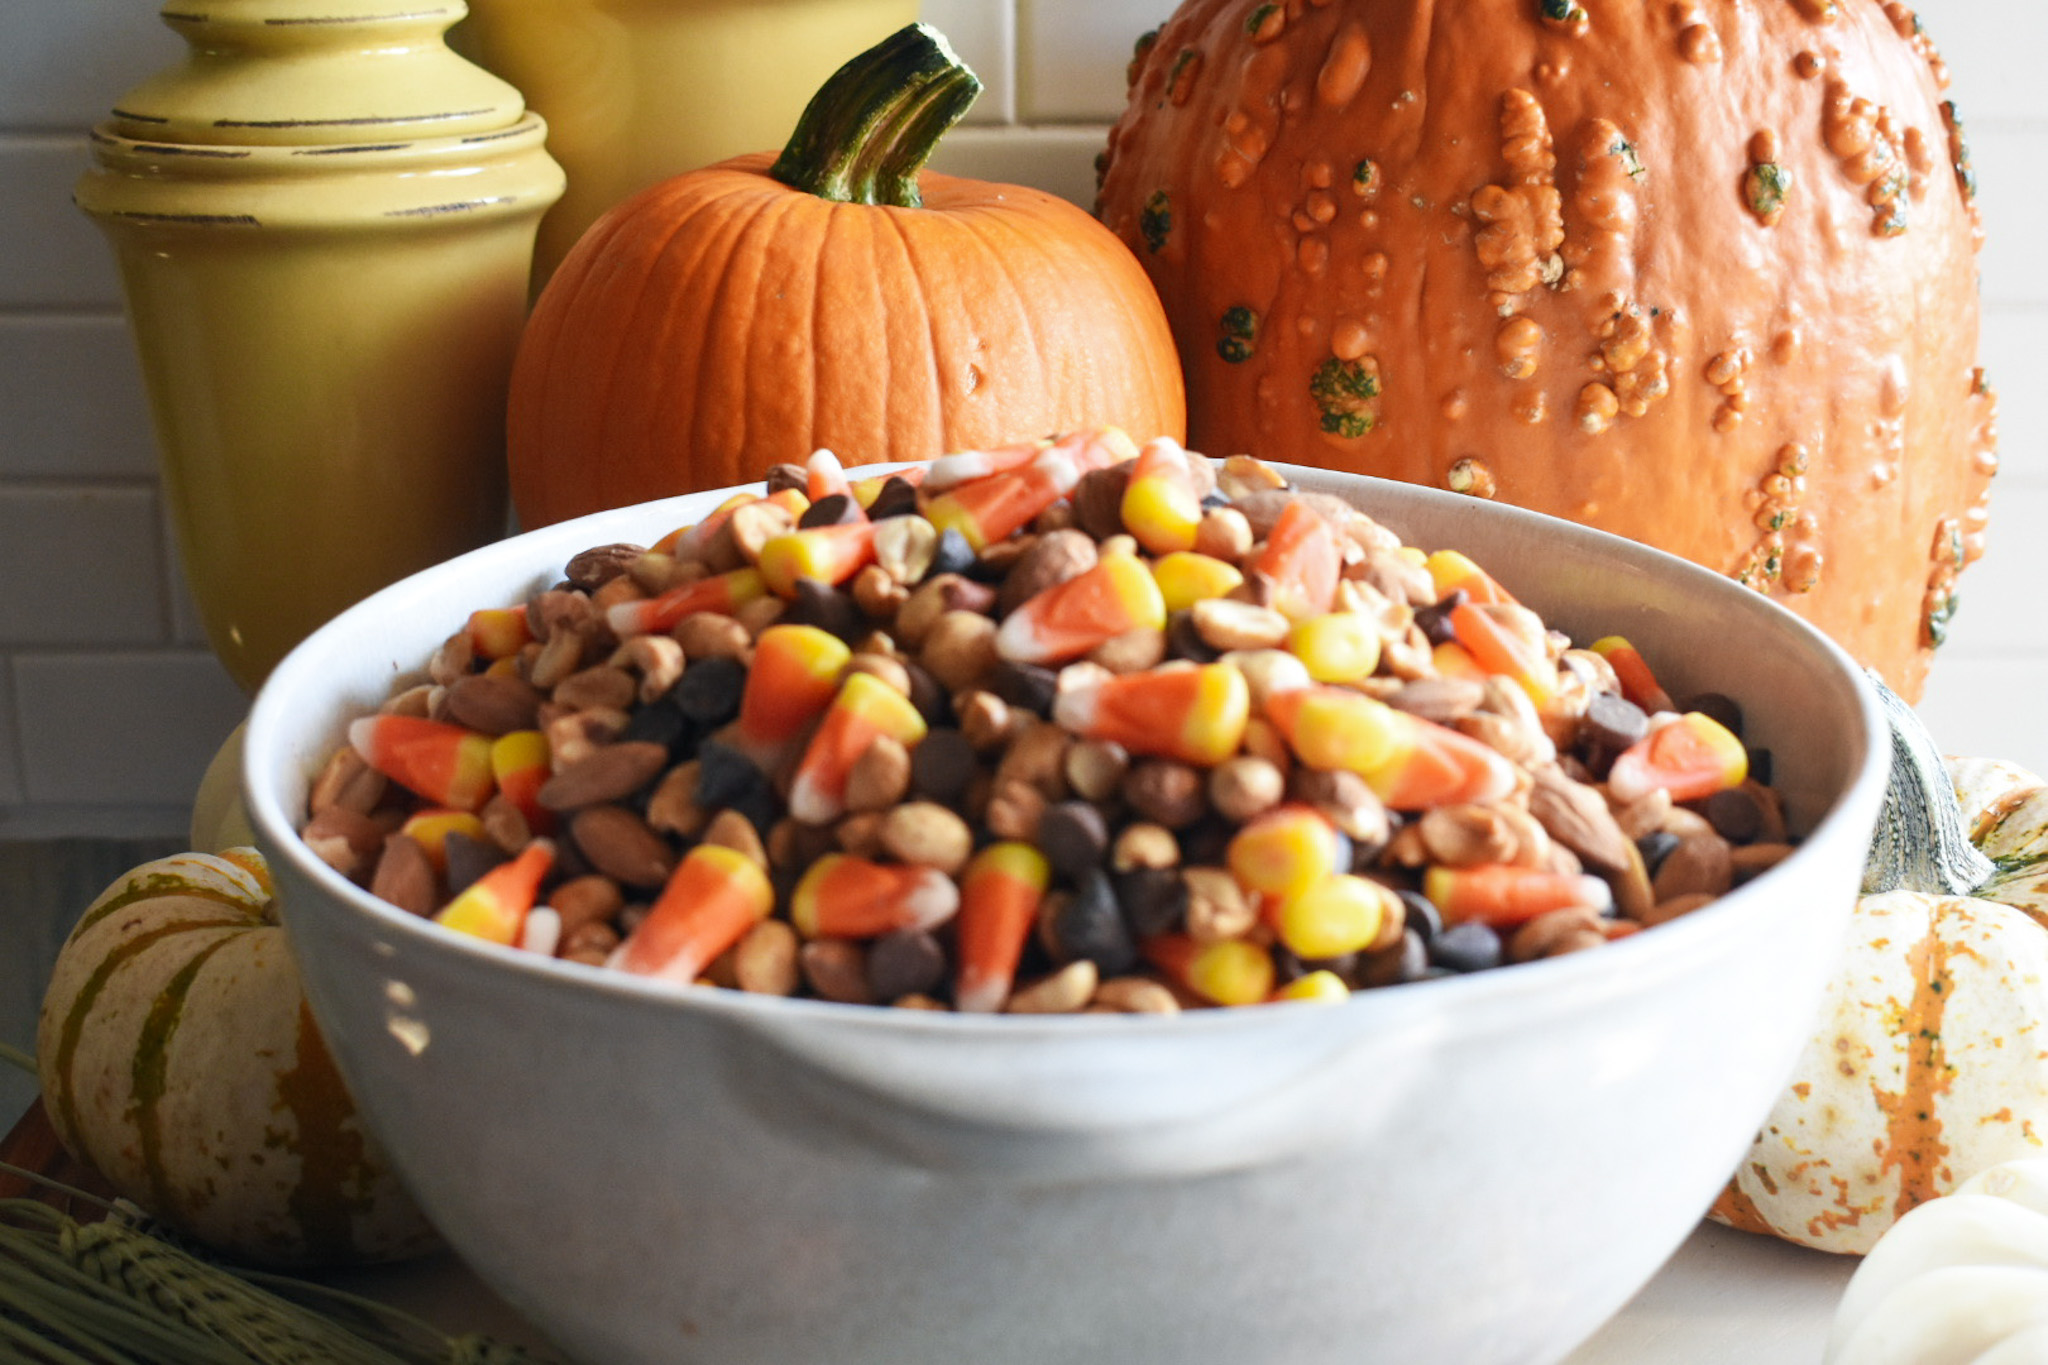 Big bowl of candy corn, peanuts, chocolate chips and almonds and pumpkins